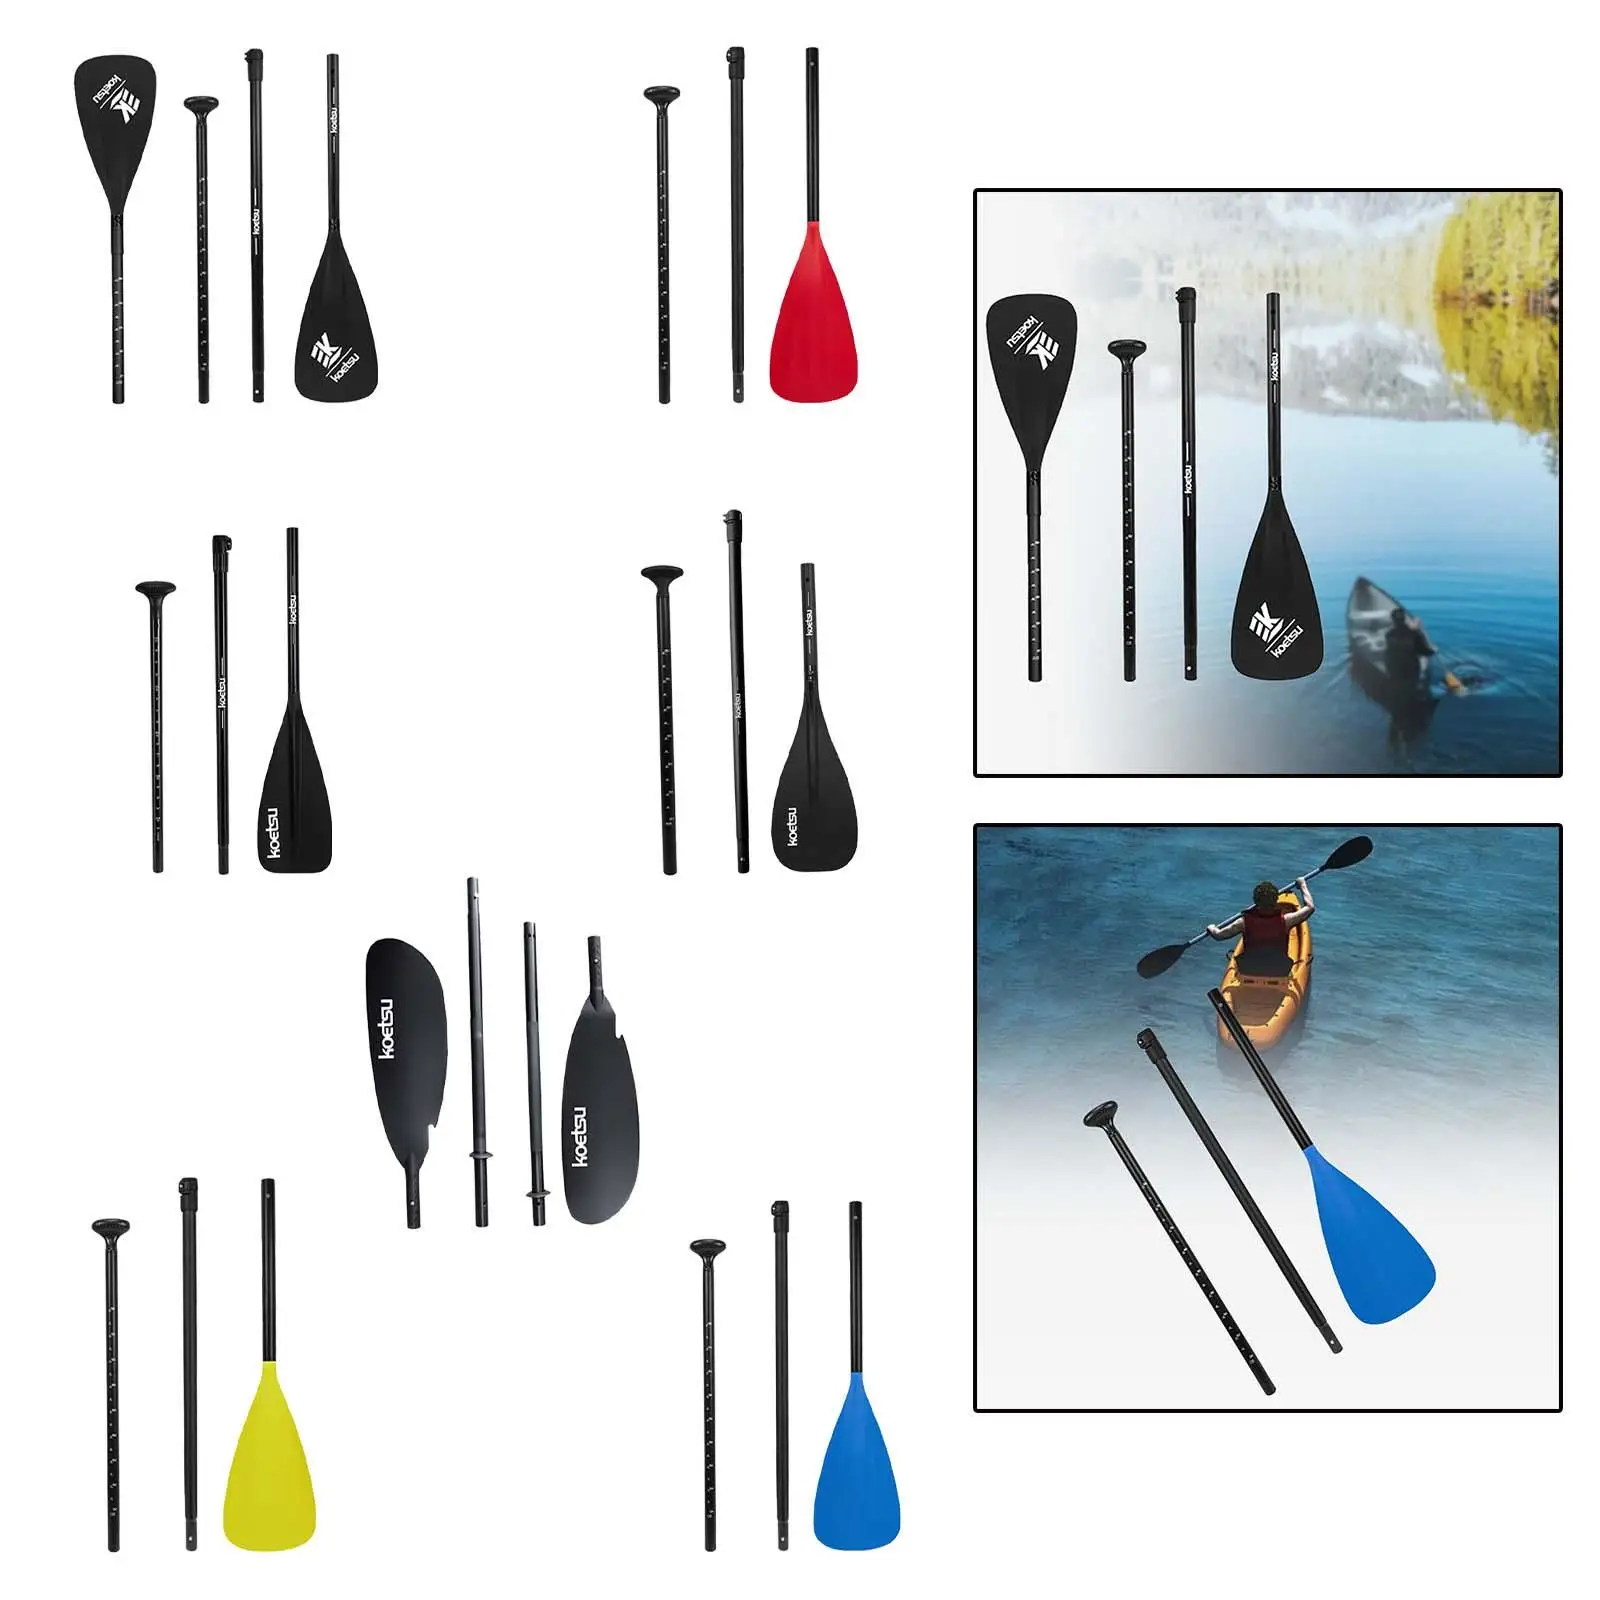 Kayak Paddles Boat Oar Lightweight Aluminum Alloy Boat Paddle Detachable Kayak Oars for All Kinds of Kayaks and Boats